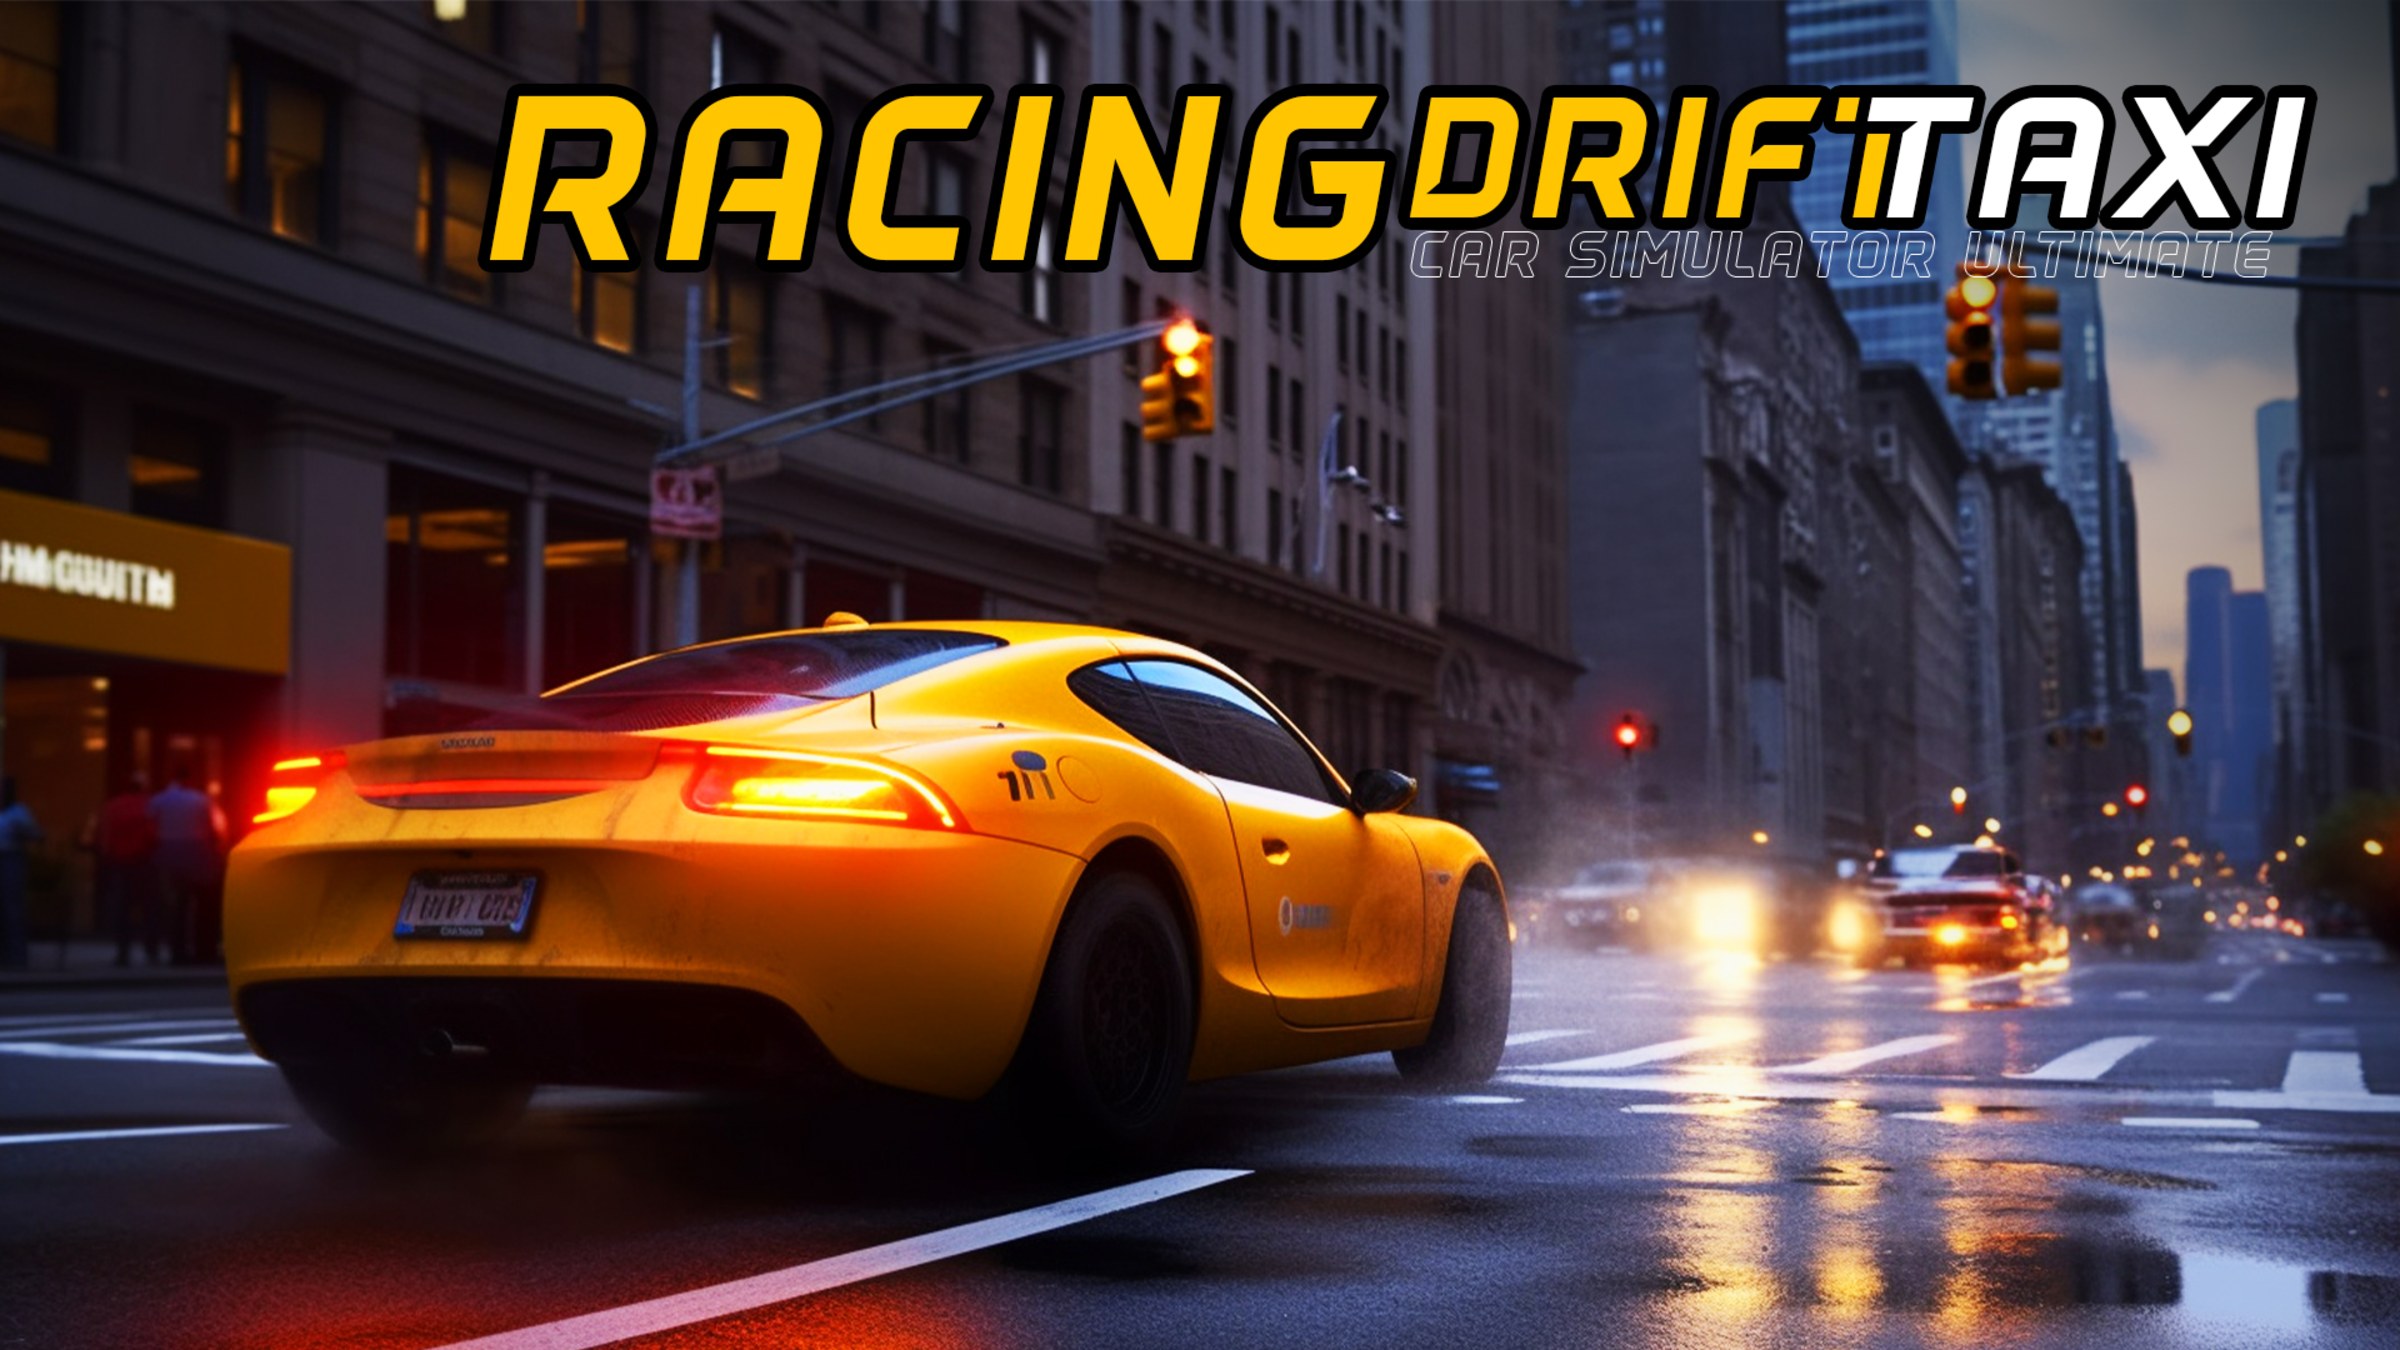 Car Games Bundle - Racing Driving School Police Drag Drift Taxi for  Nintendo Switch - Nintendo Official Site